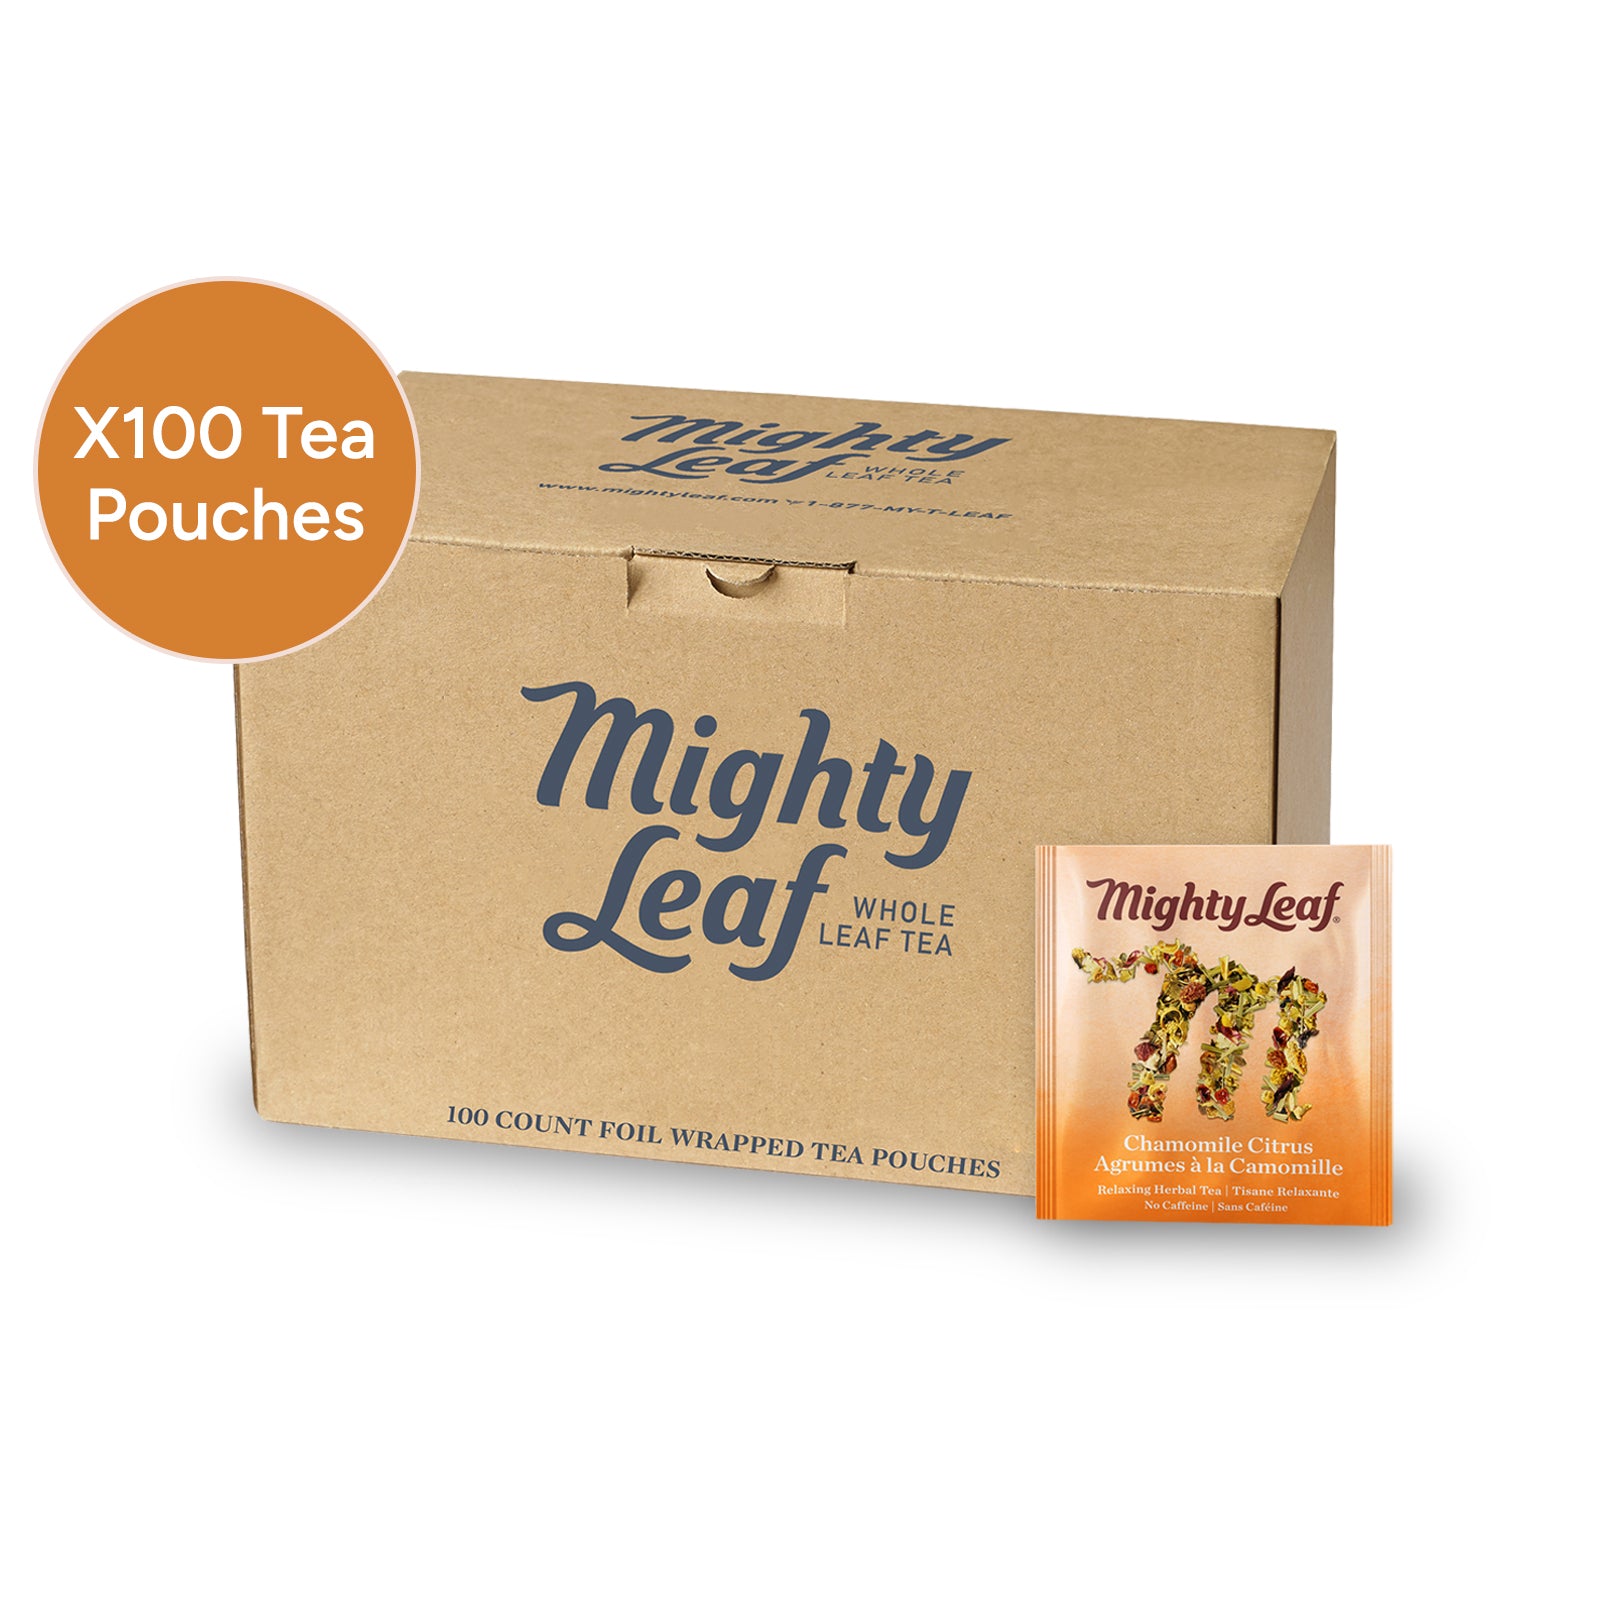 Mighty Leaf Herbal Tea Bags Chamomile Citrus X 100 Tea Pouches